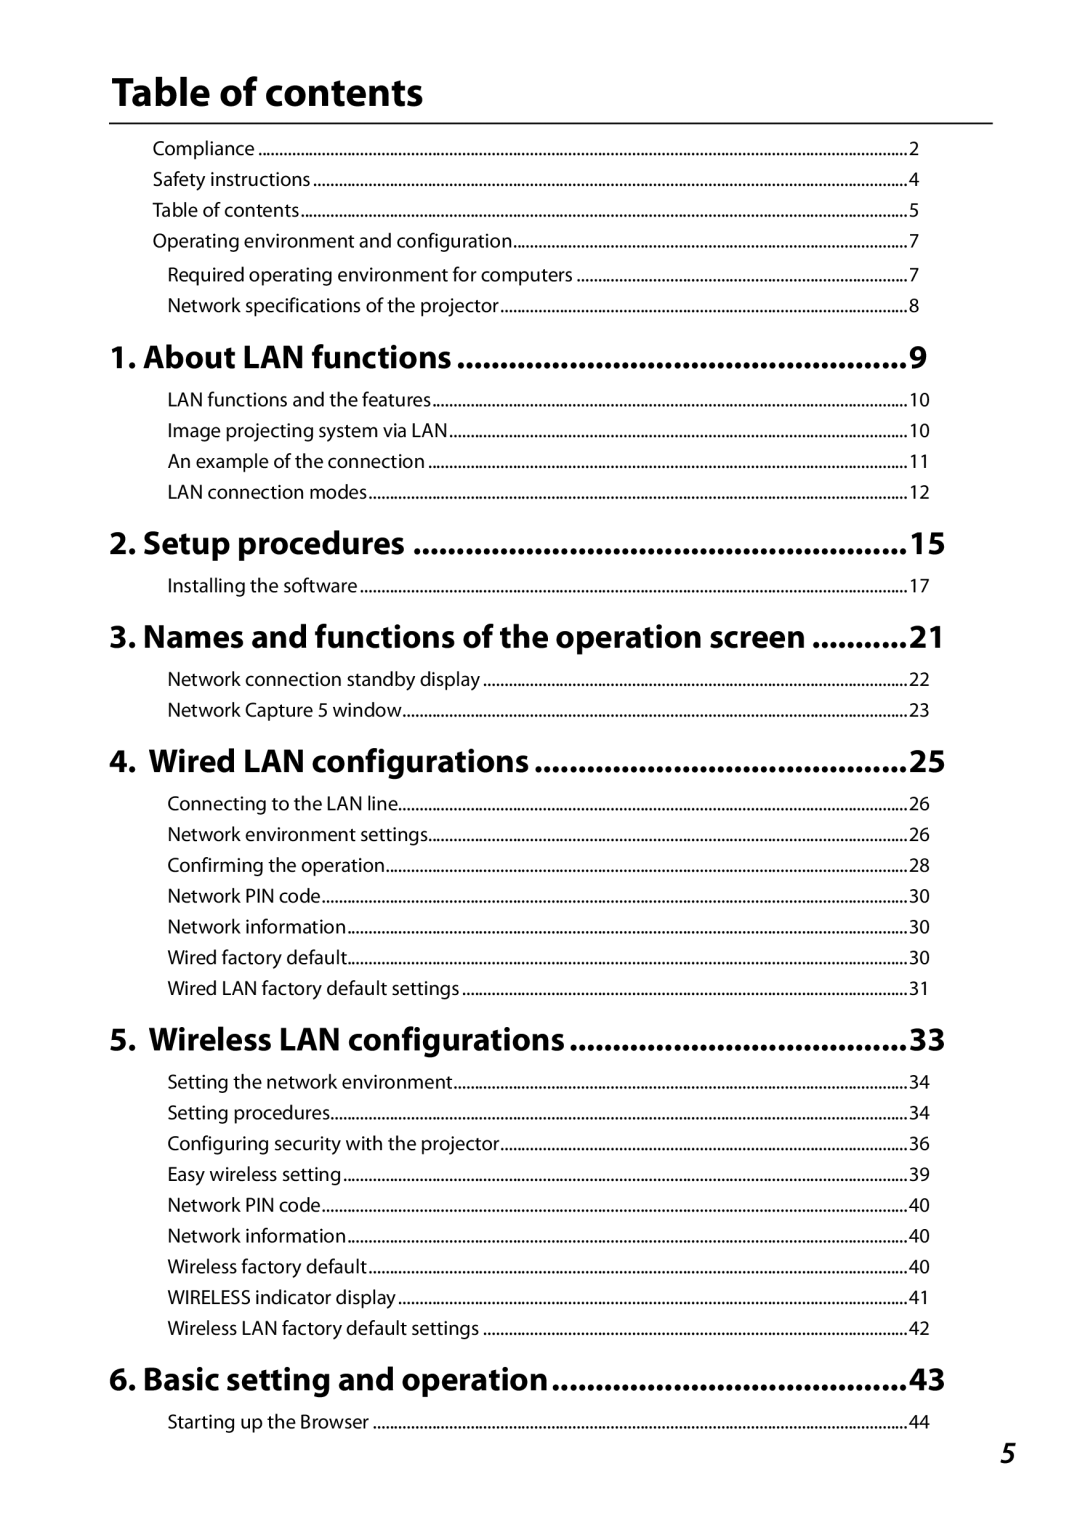 Sanyo QXXAVC922---P Table of contents, About LAN functions, Setup procedures, Names and functions of the operation screen 